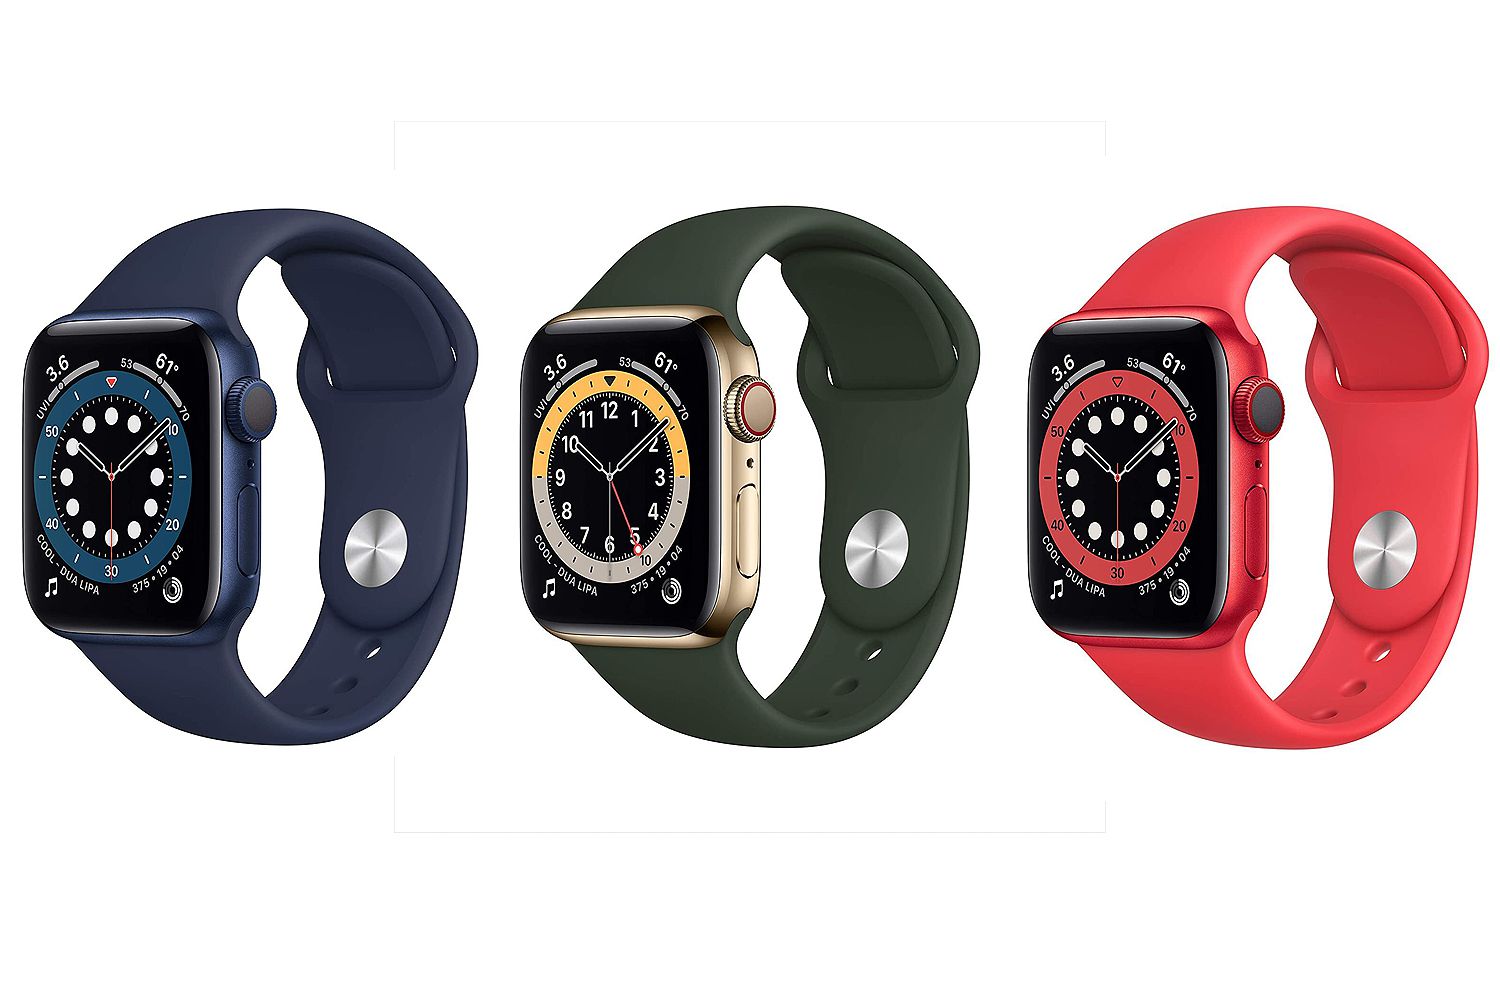 The New Apple Watch Series 6 Is Finally Here &mdash; and It's the Most Colorful Smartwatch Yet